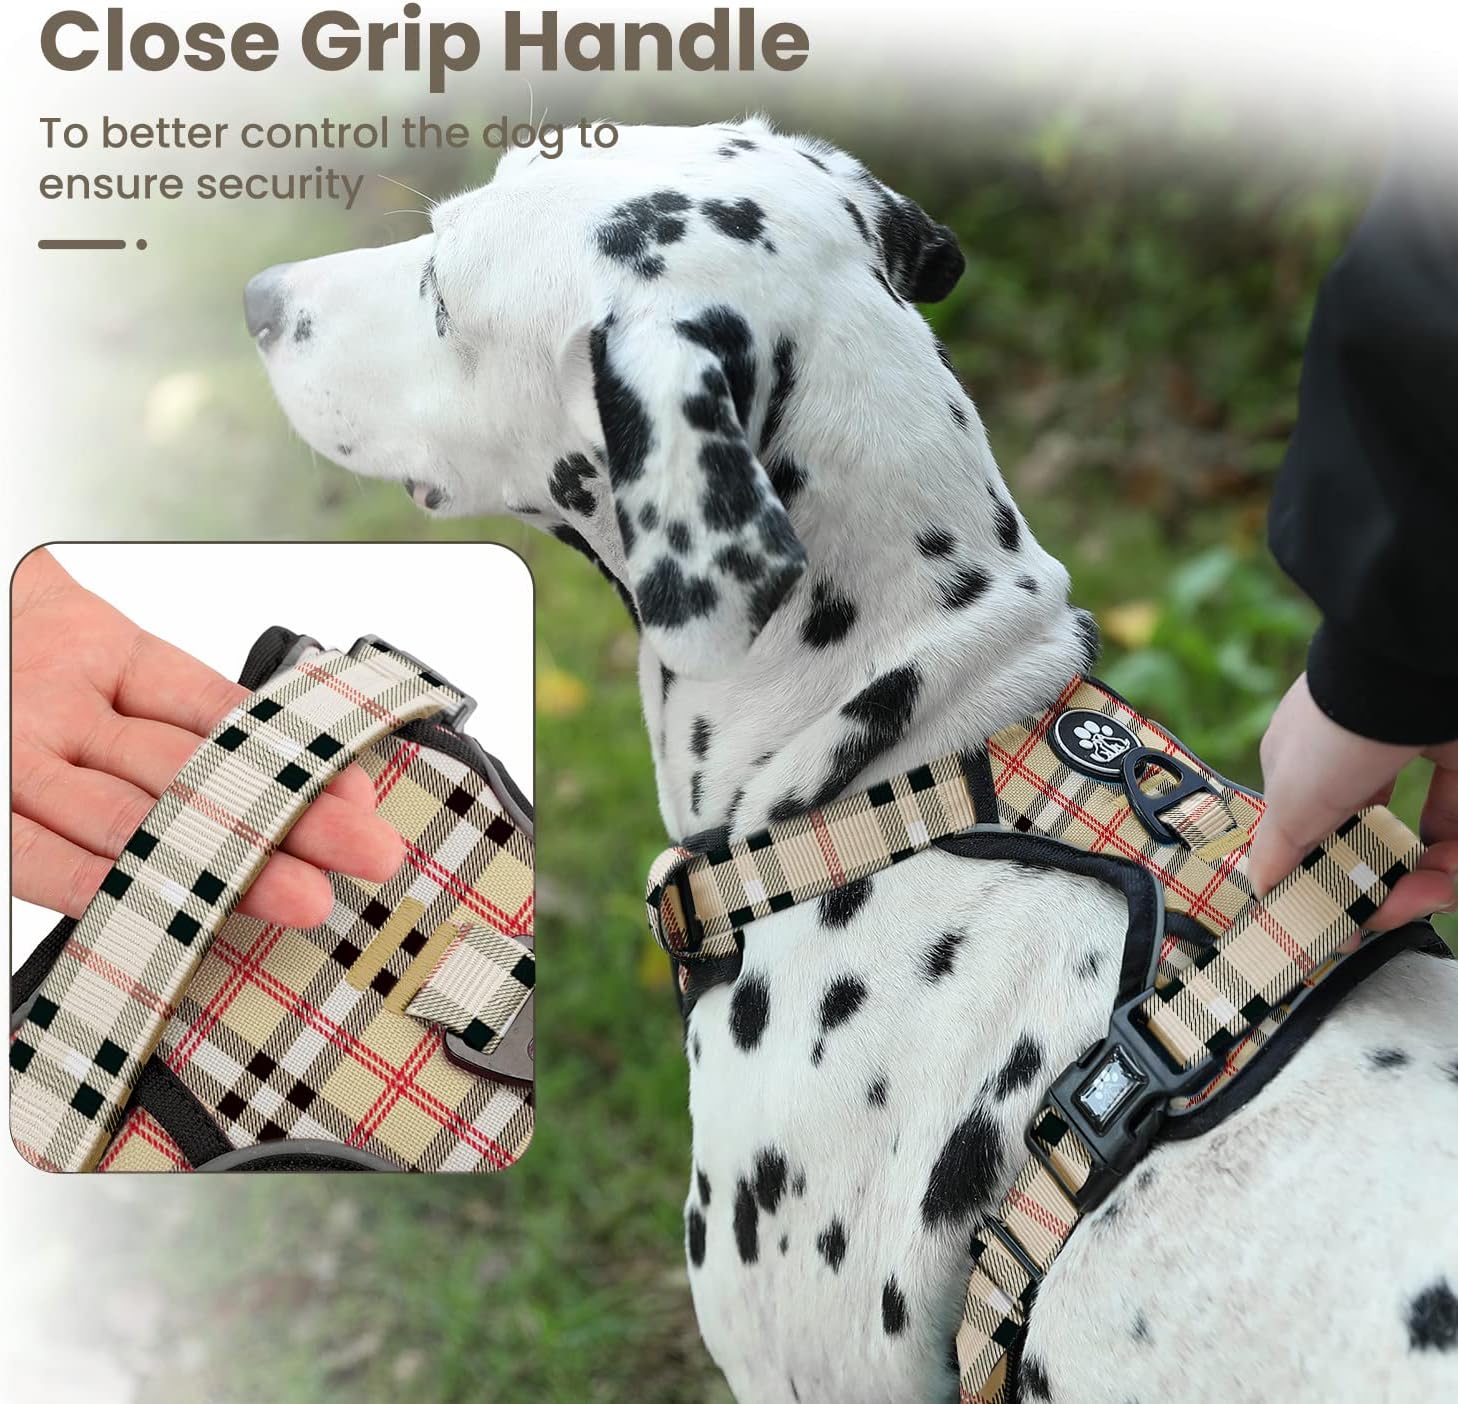 FURRYFECTION Plaid Dog Harness for Large Dogs, No Pull Reflective Pet Harness, No Choke Vest Harnesses with Leash, Easy Control Handle, Adjustable Front Lead  Seat Belt, Beige  White,L